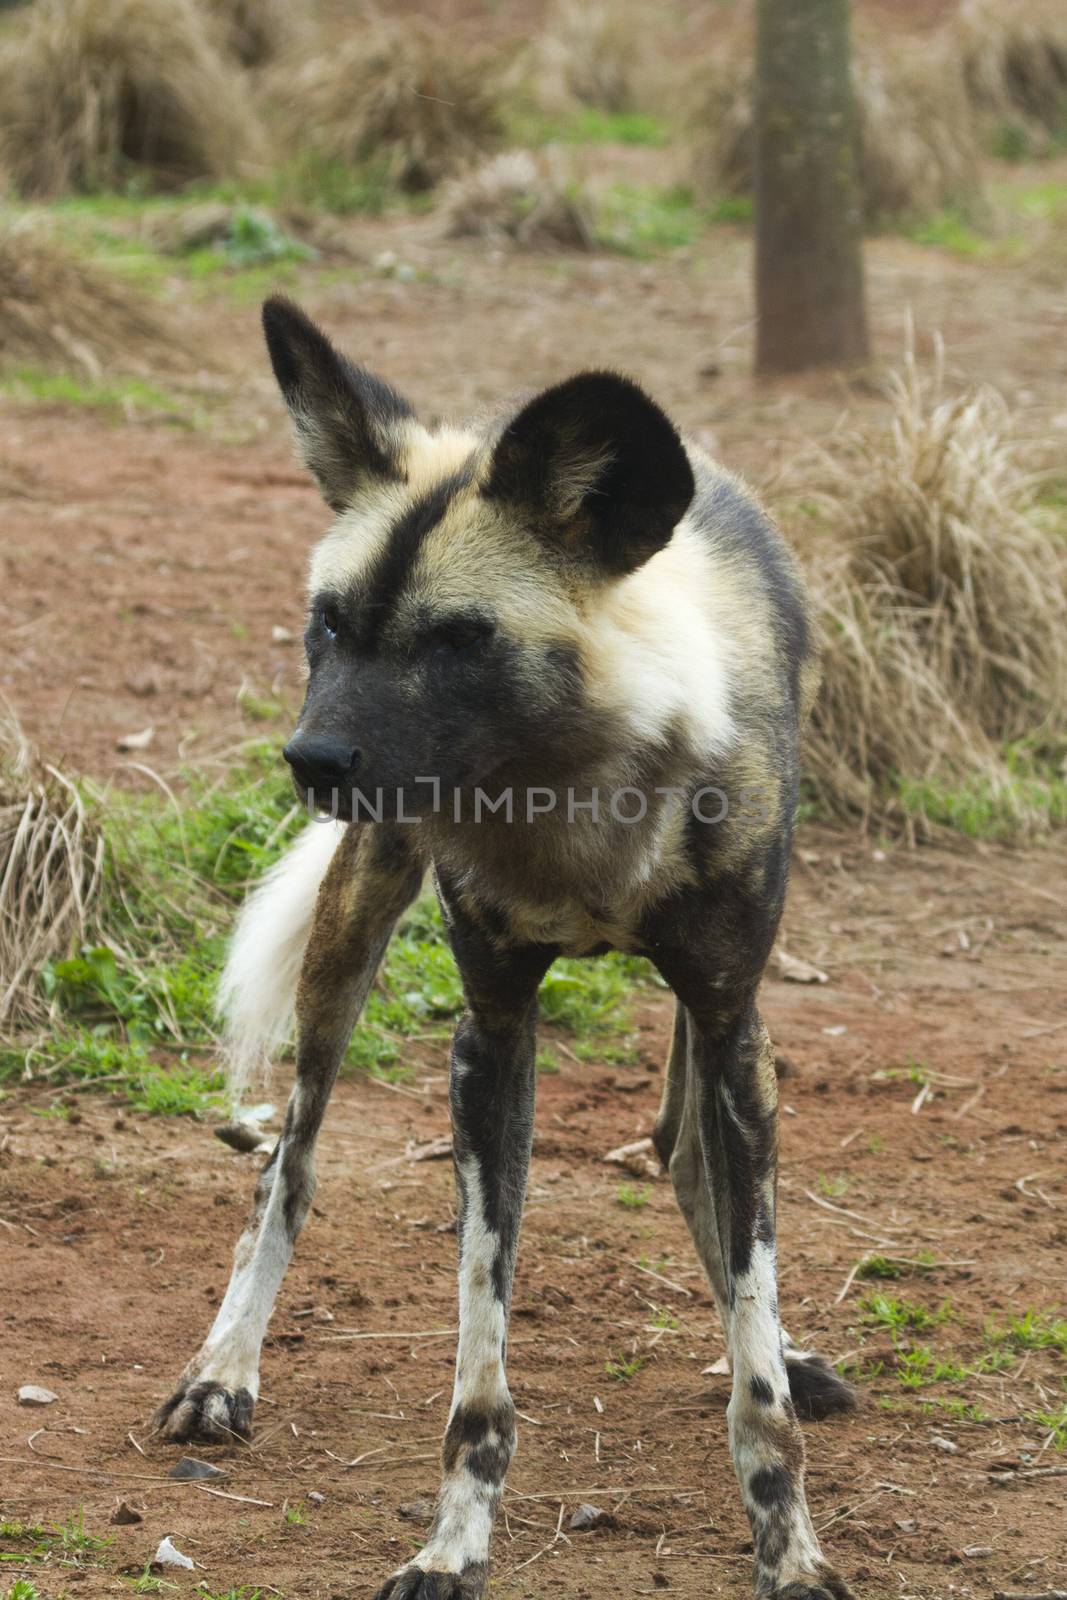 African painted wild dog (Lycaon pictus) closeup